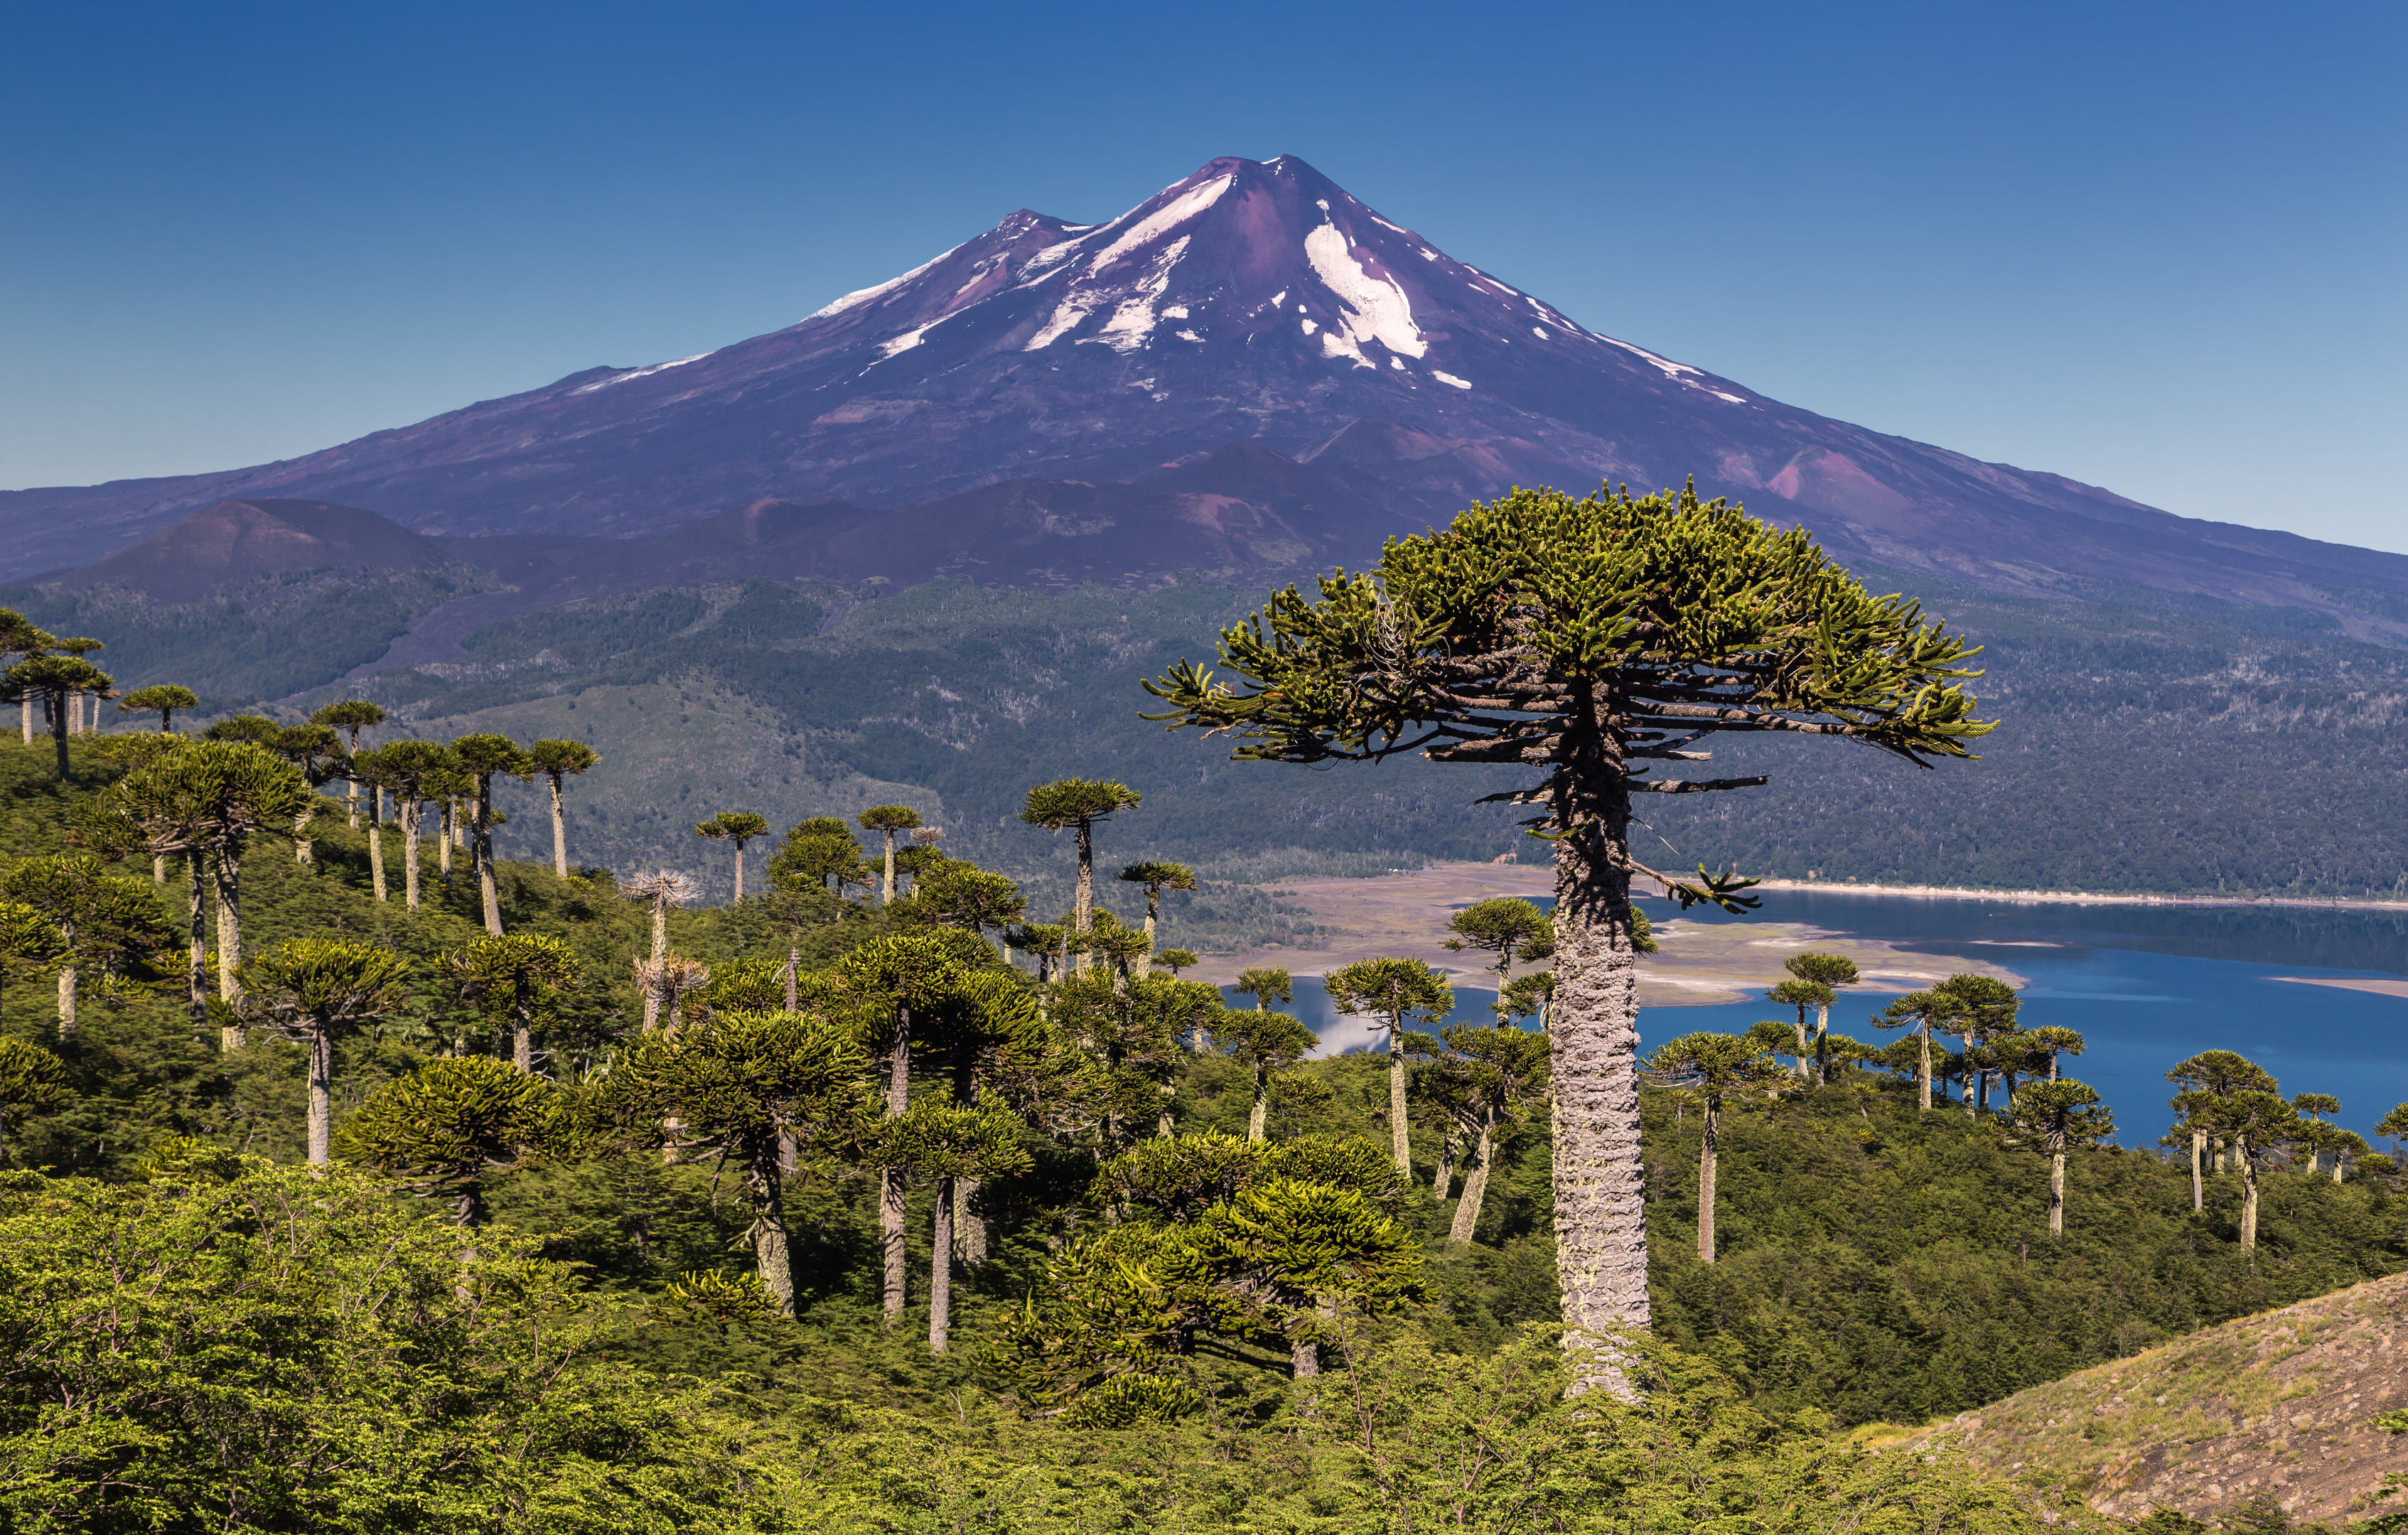 Monkey puzzle trees in Chile (Getty Images)